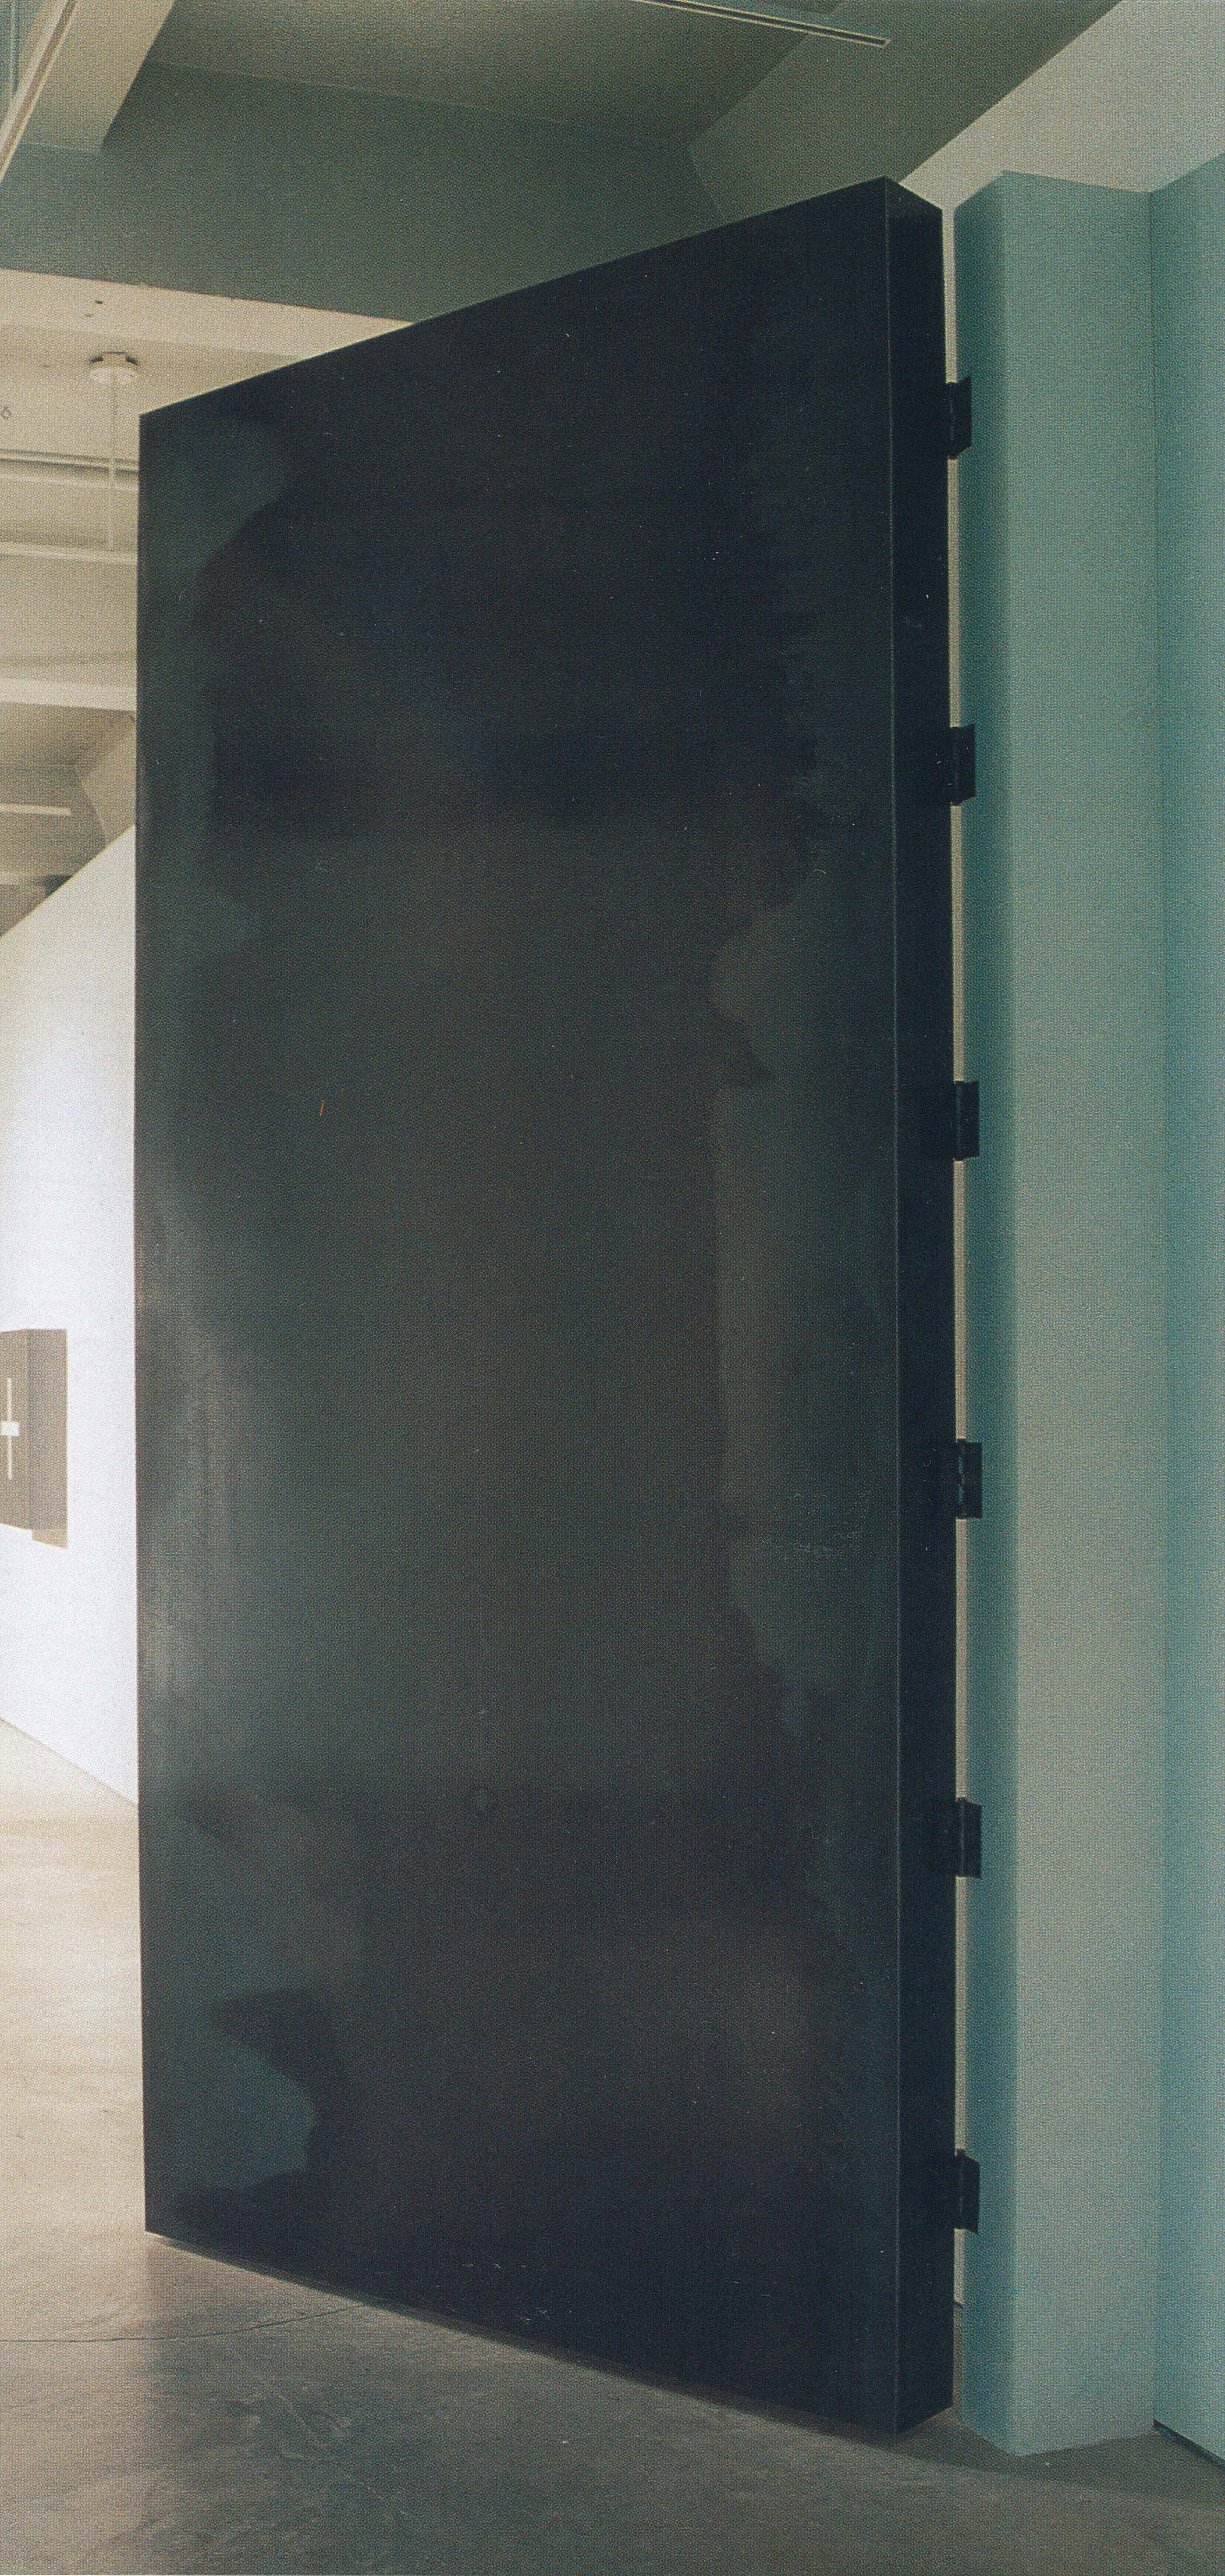 A large steel-made artwork is installed in a gallery. It’s overall colour is black, and some oil-stain patterns appear on the surface. It is door-like shaped and attached to a gallery wall with hinges. 